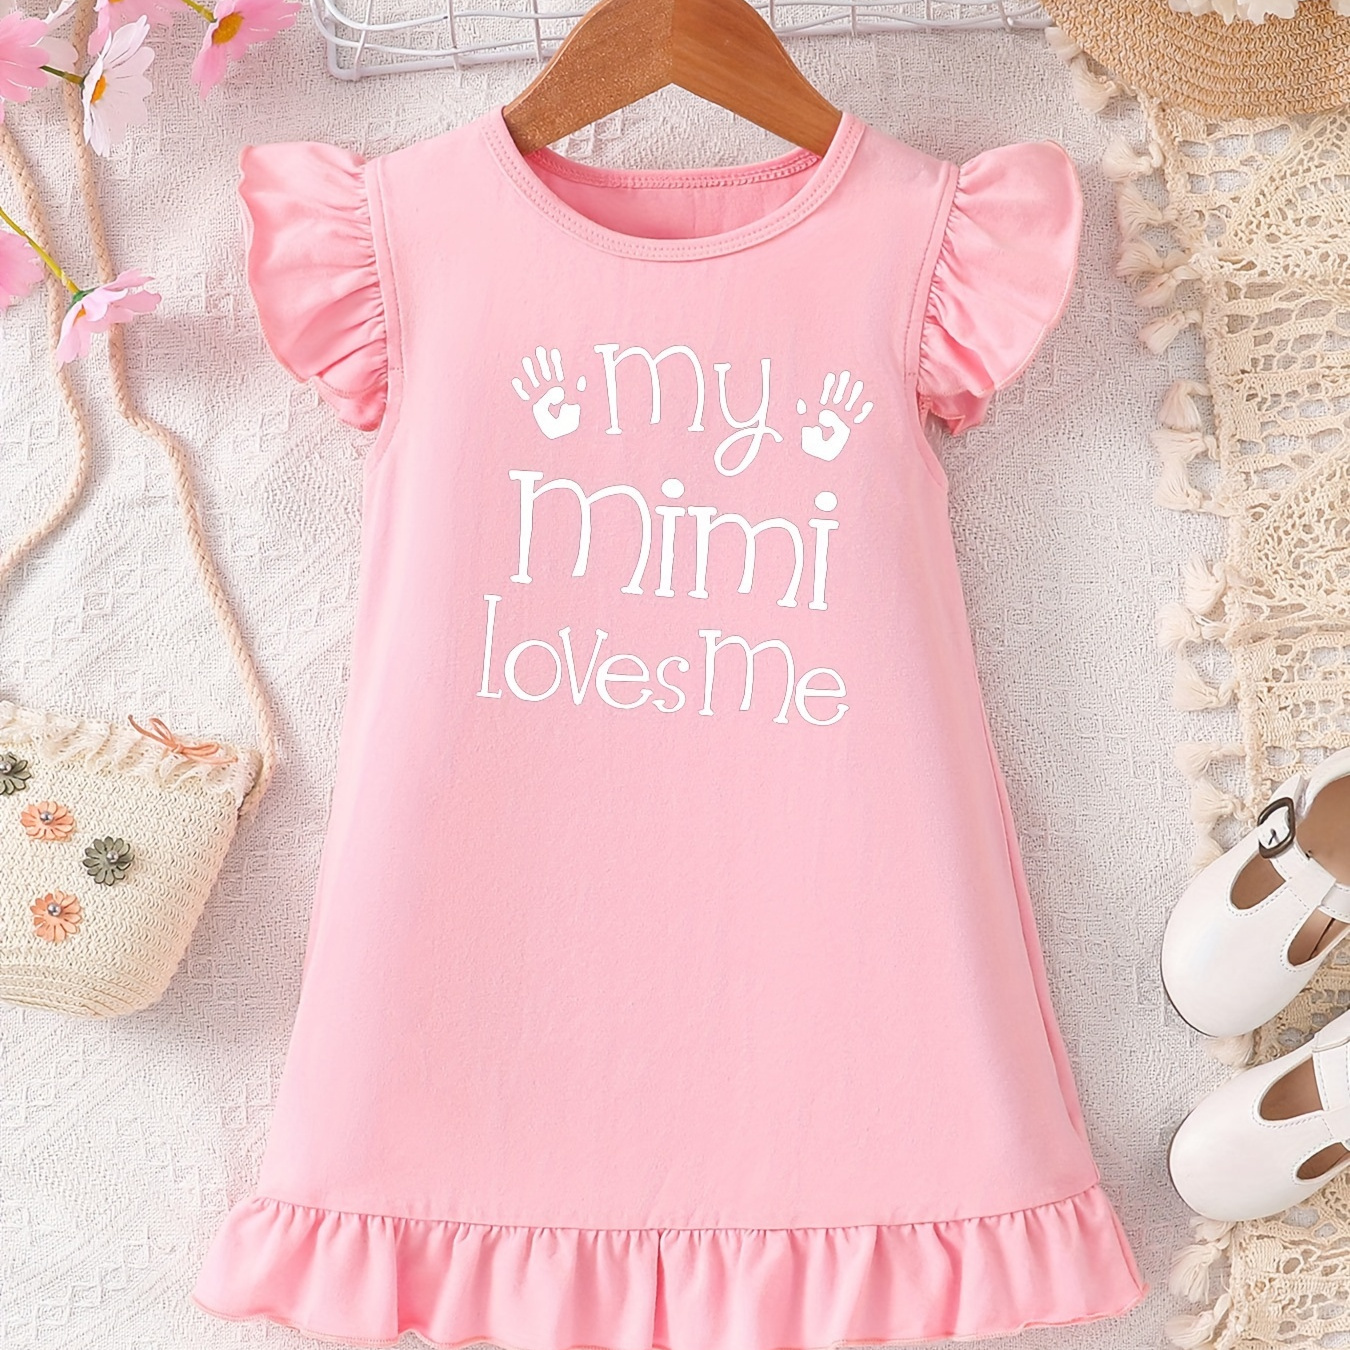 

Graffiti My Mimi Loves Me And Hand Prints Graphic Print, Baby Girls' Casual Stylish Crew Neck Ruffle Trim Cotton Dress For Spring & Summer, Toddler Girls' Clothes